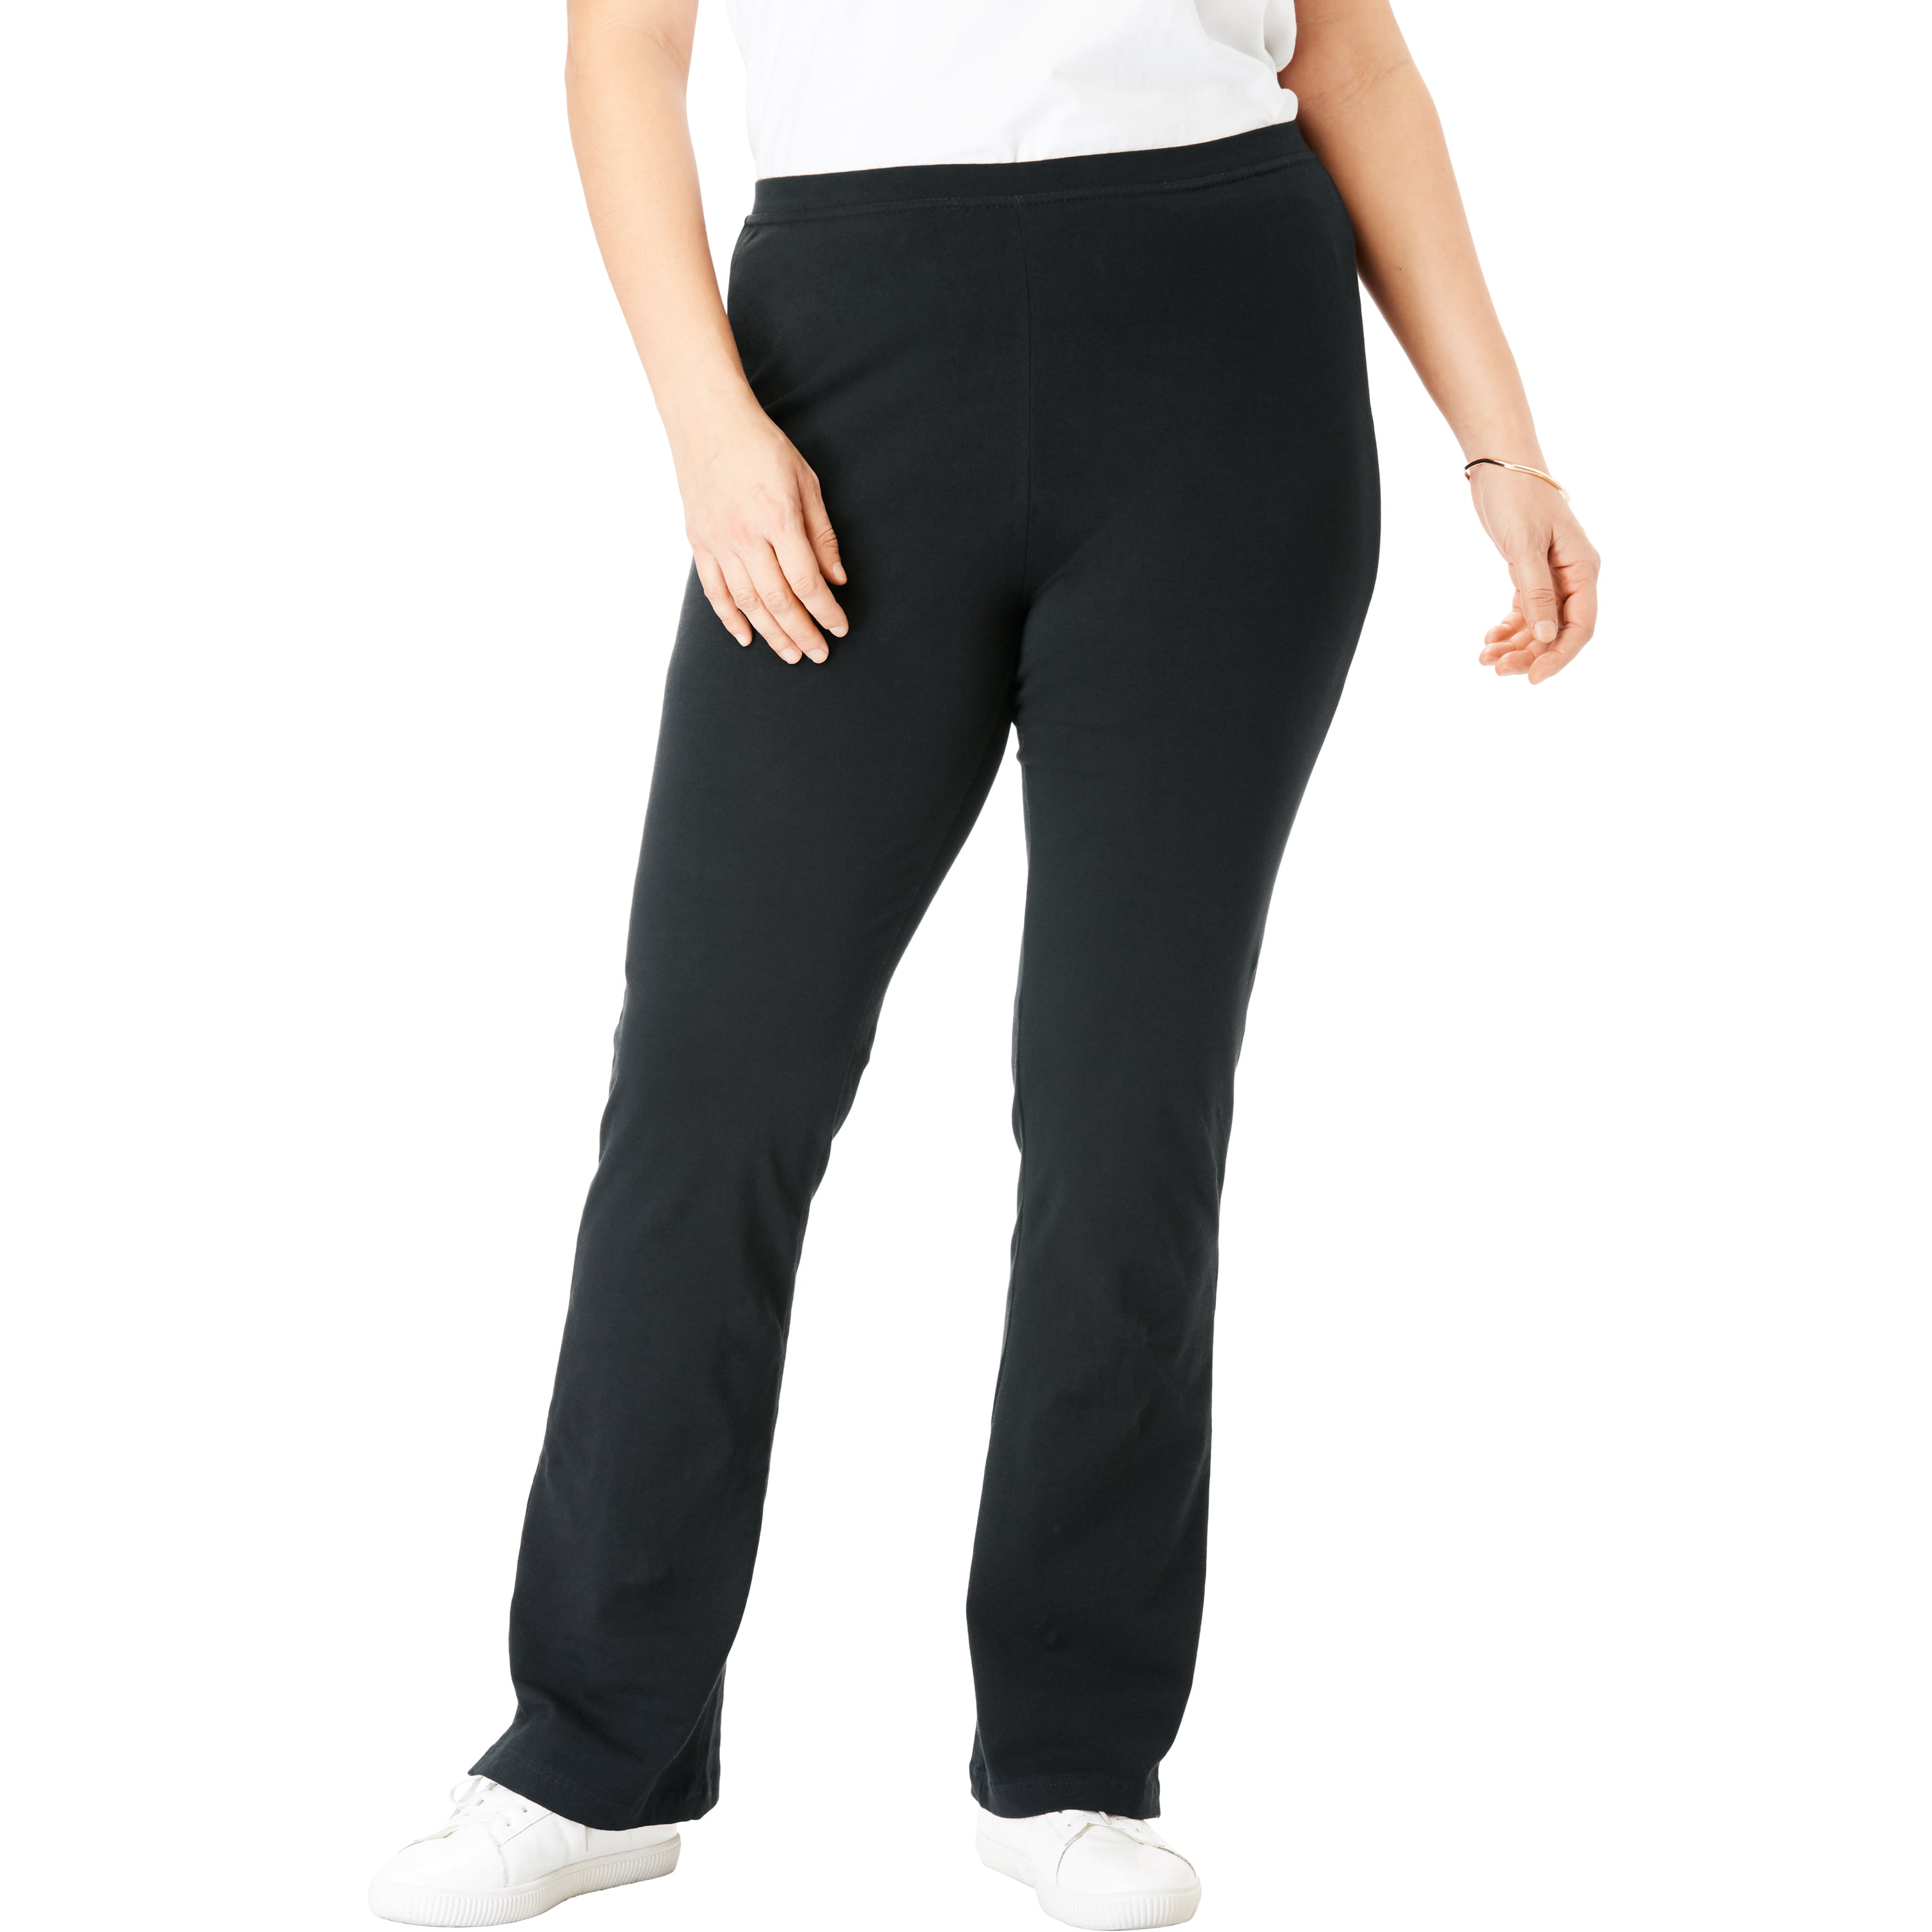 Tall Plus Size Yoga Pants For Women